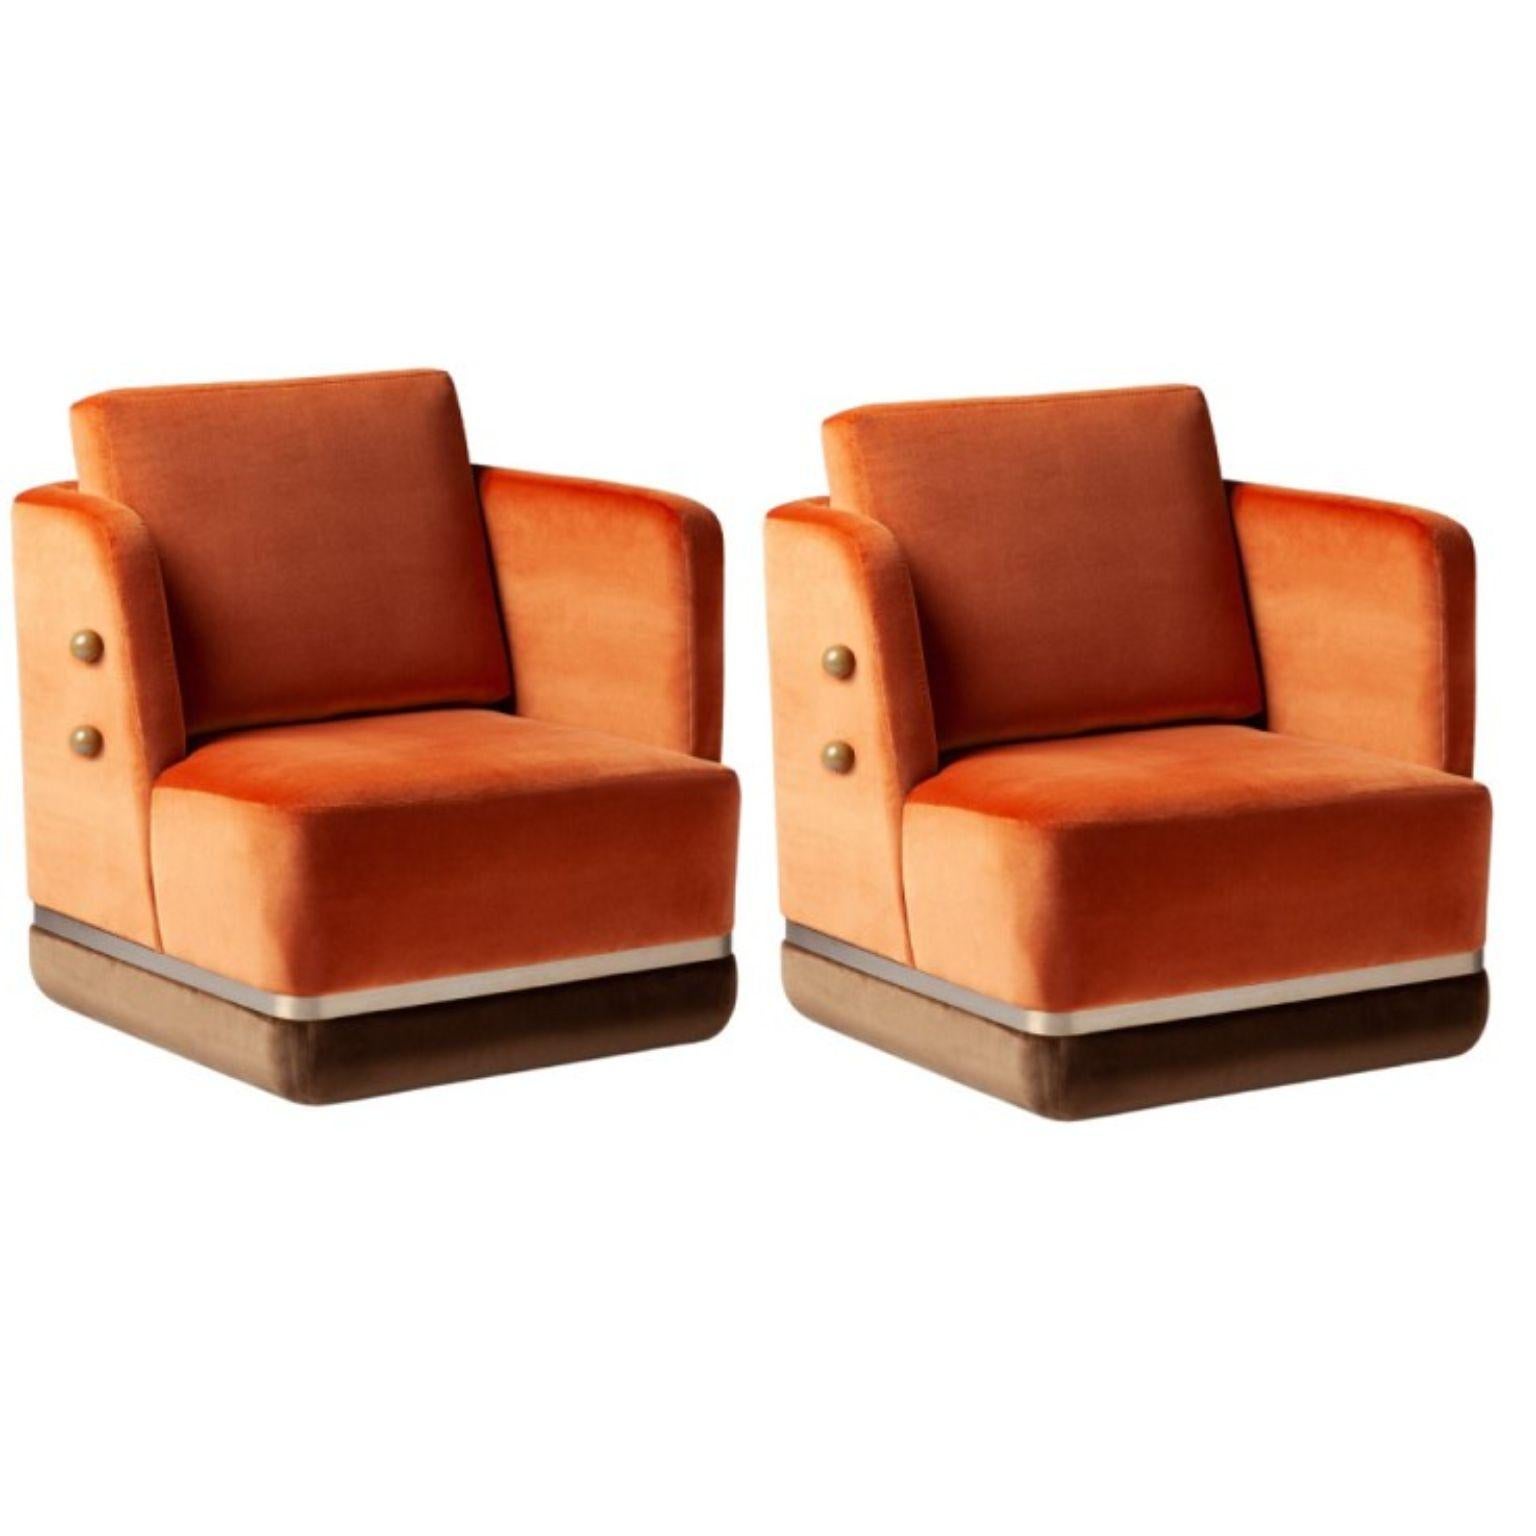 Set of 2 Panorama armchairs by Dooq
Materials: Lacquered MDF, Fabric, Leather, Stainless Steel
Dimensions: W 69 x D 73 x H 86 cm


Dooq is a design company dedicated to celebrate the luxury of living. Creating designs that stimulate the senses,